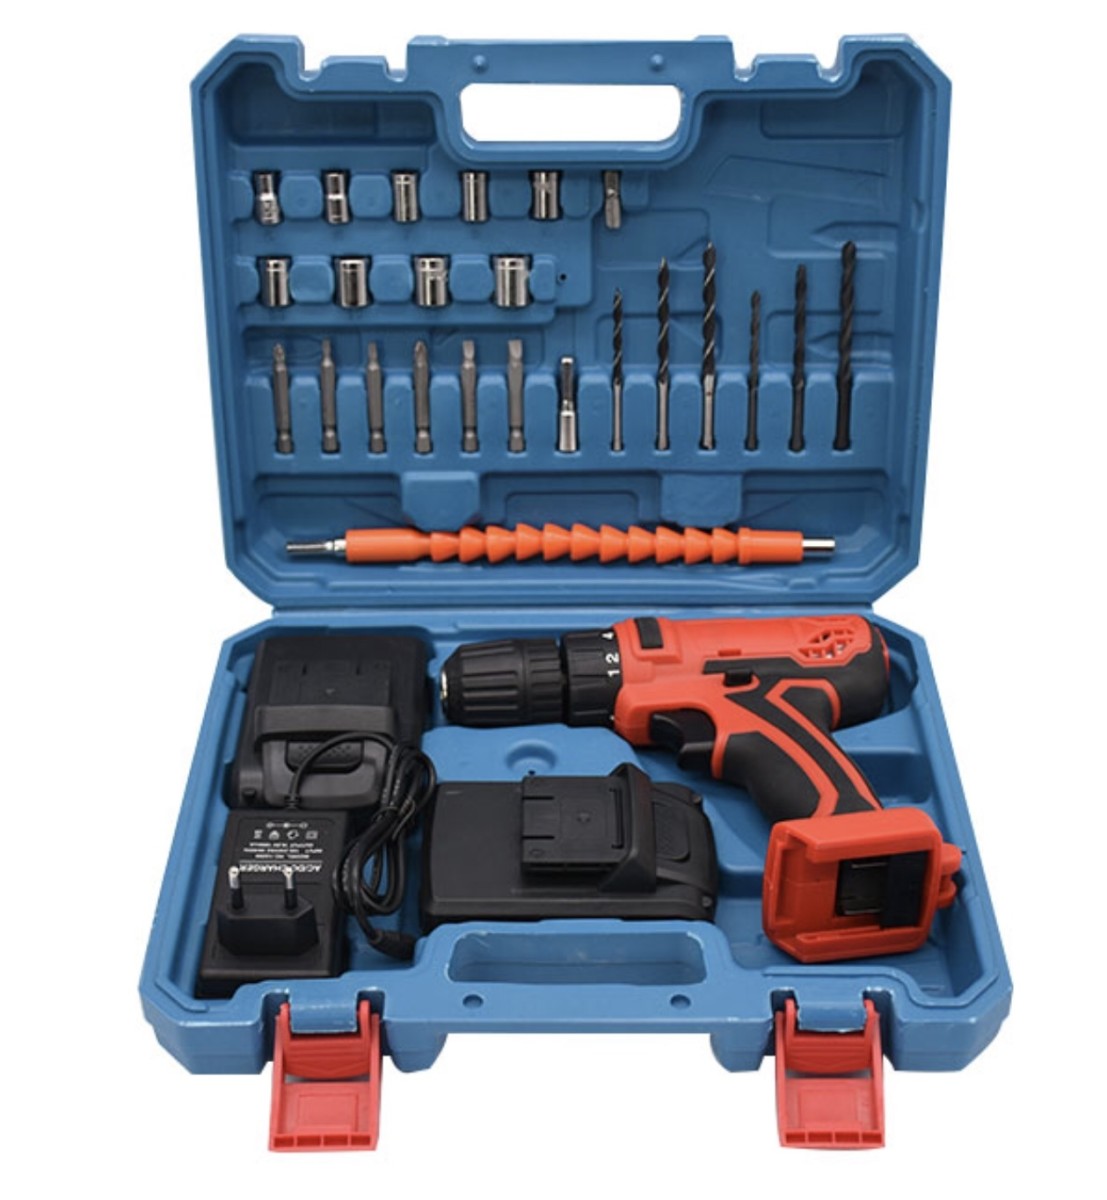 homeowners-can-use-5startools-gardenjoy-drill-kit-and-impact-wrench-kit